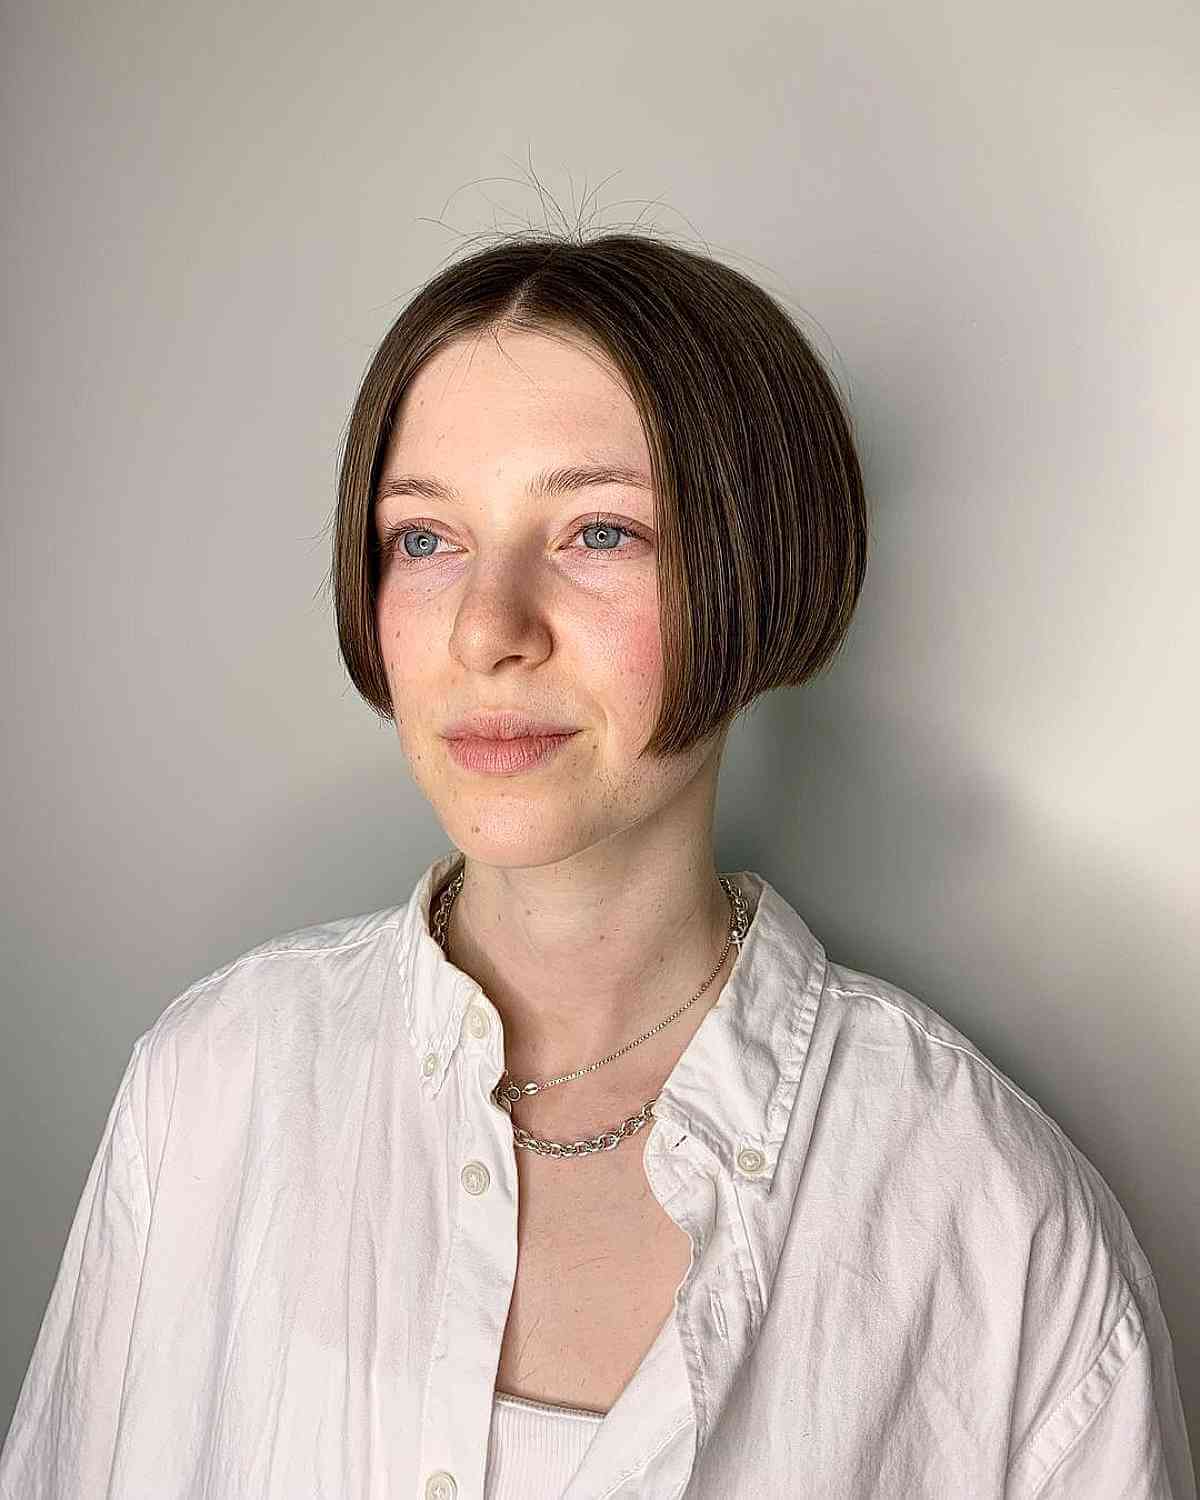 Ear-Length Bob with a Middle Part That is Above the Shoulders